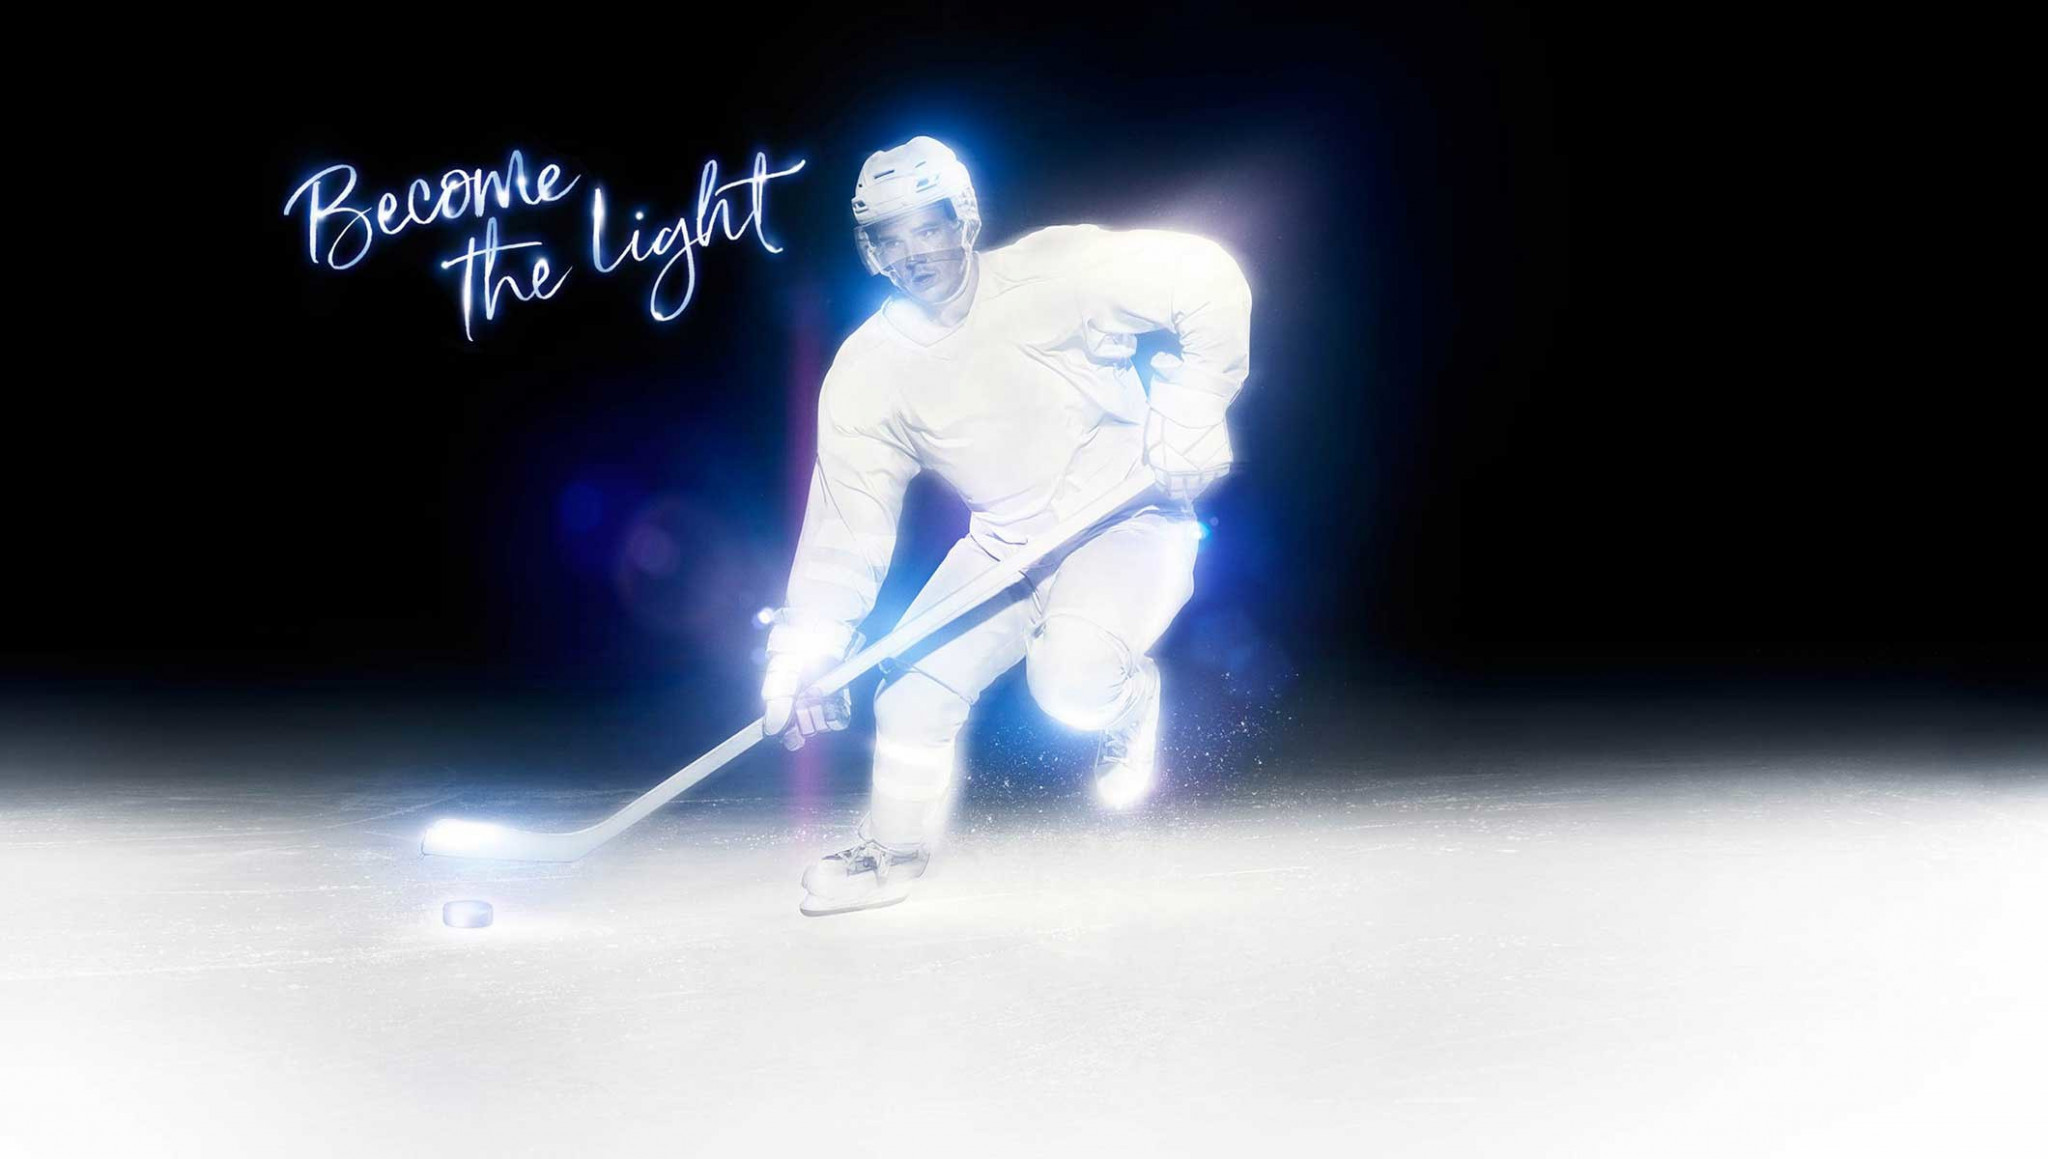 The International Olympic Committee has launched a new integrated brand campaign, "Become The Light" ©IOC